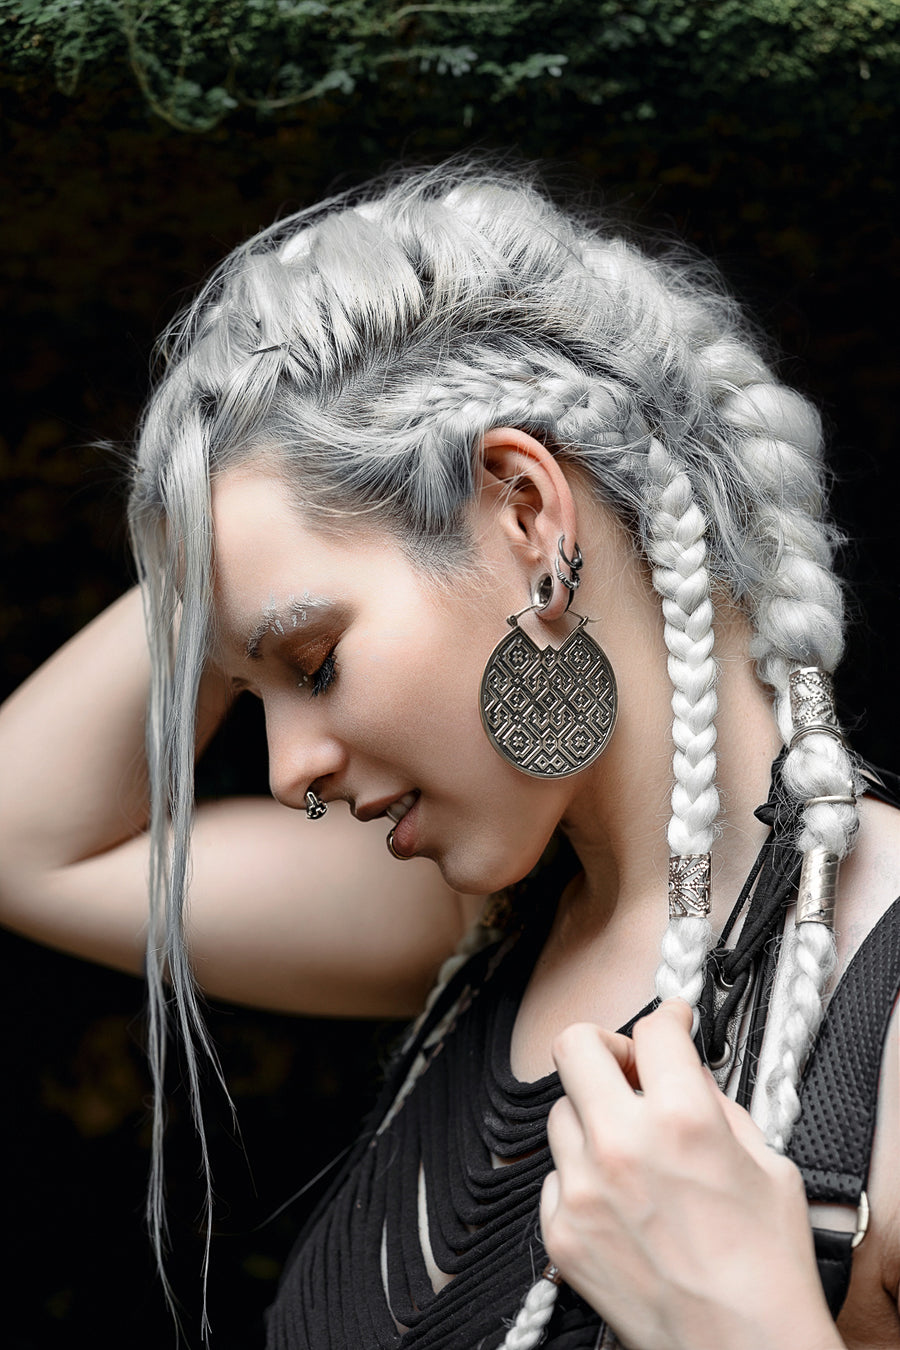 A close-up side profile of a woman wearing Silver 925 Shipibo patterned earrings, accentuating the tribal and psychedelic aesthetic.